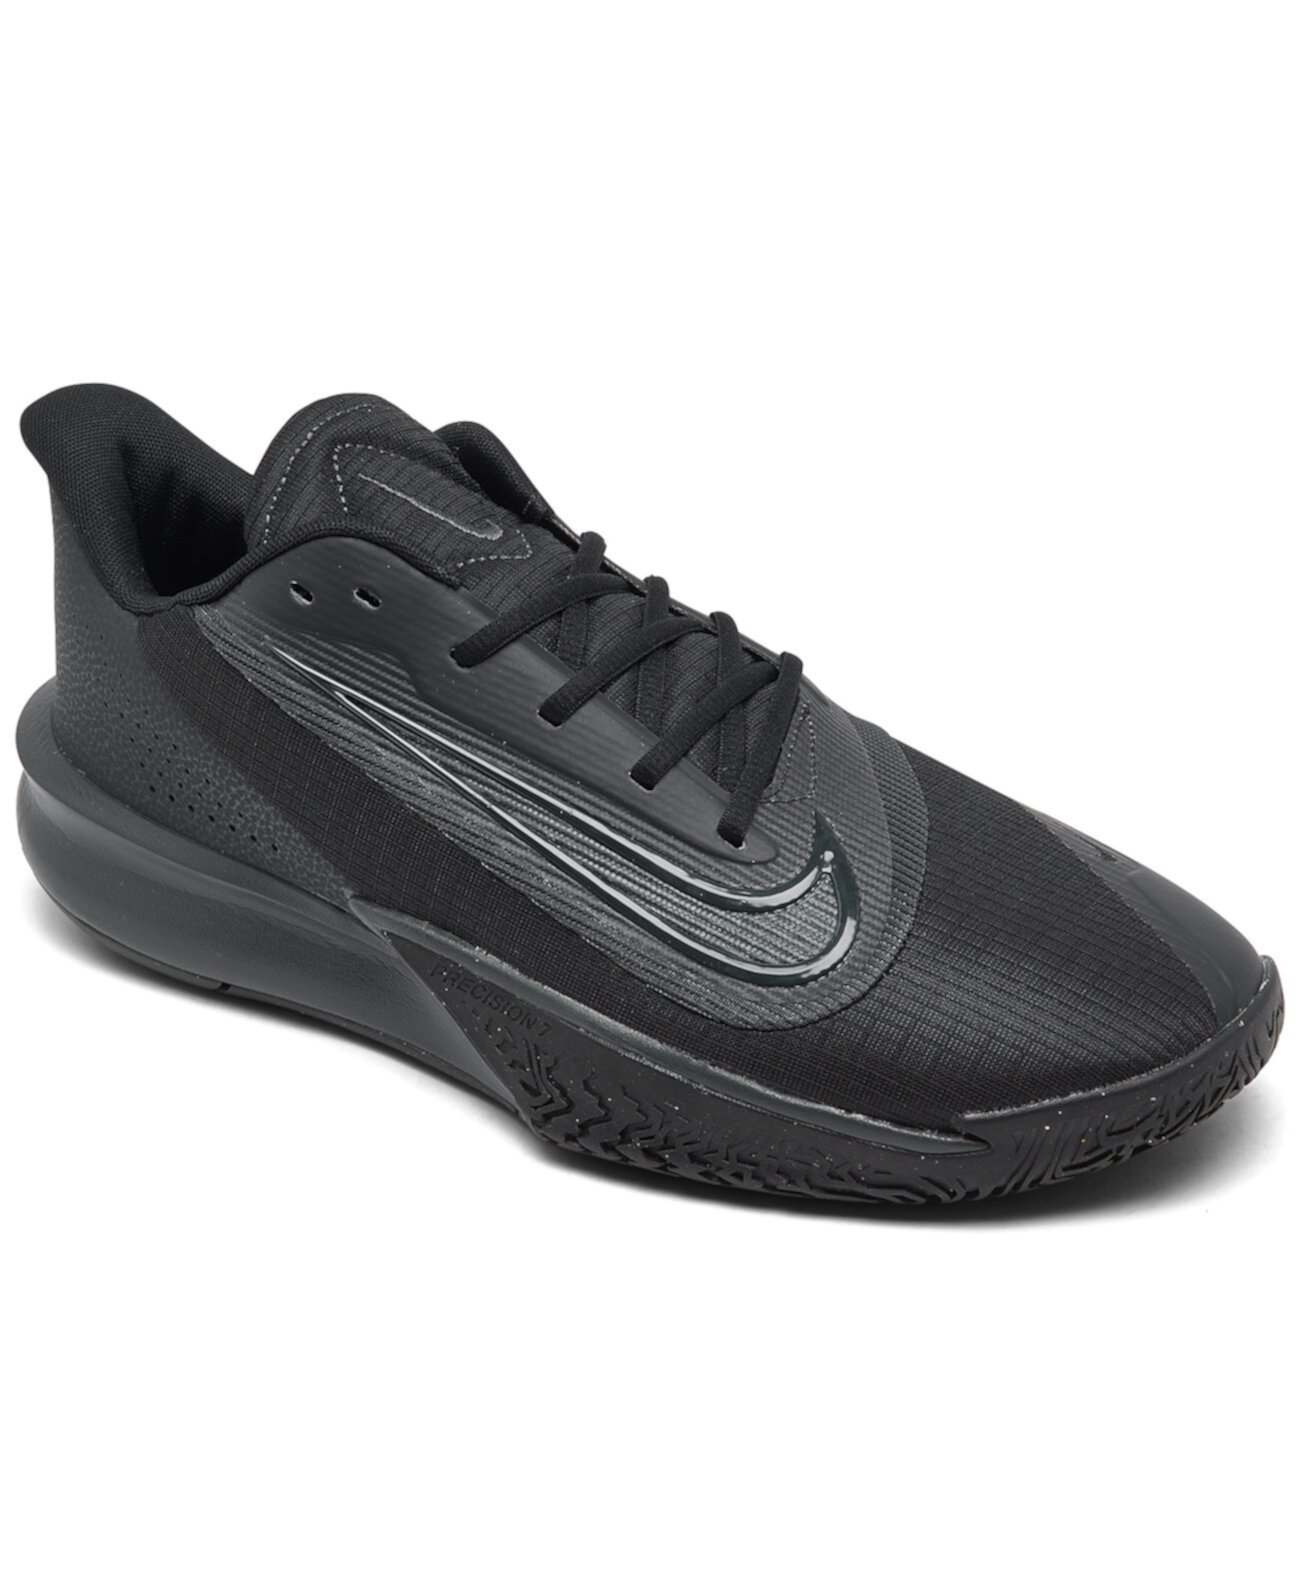 Men's Precision 7 Basketball Sneakers from Finish Line Nike